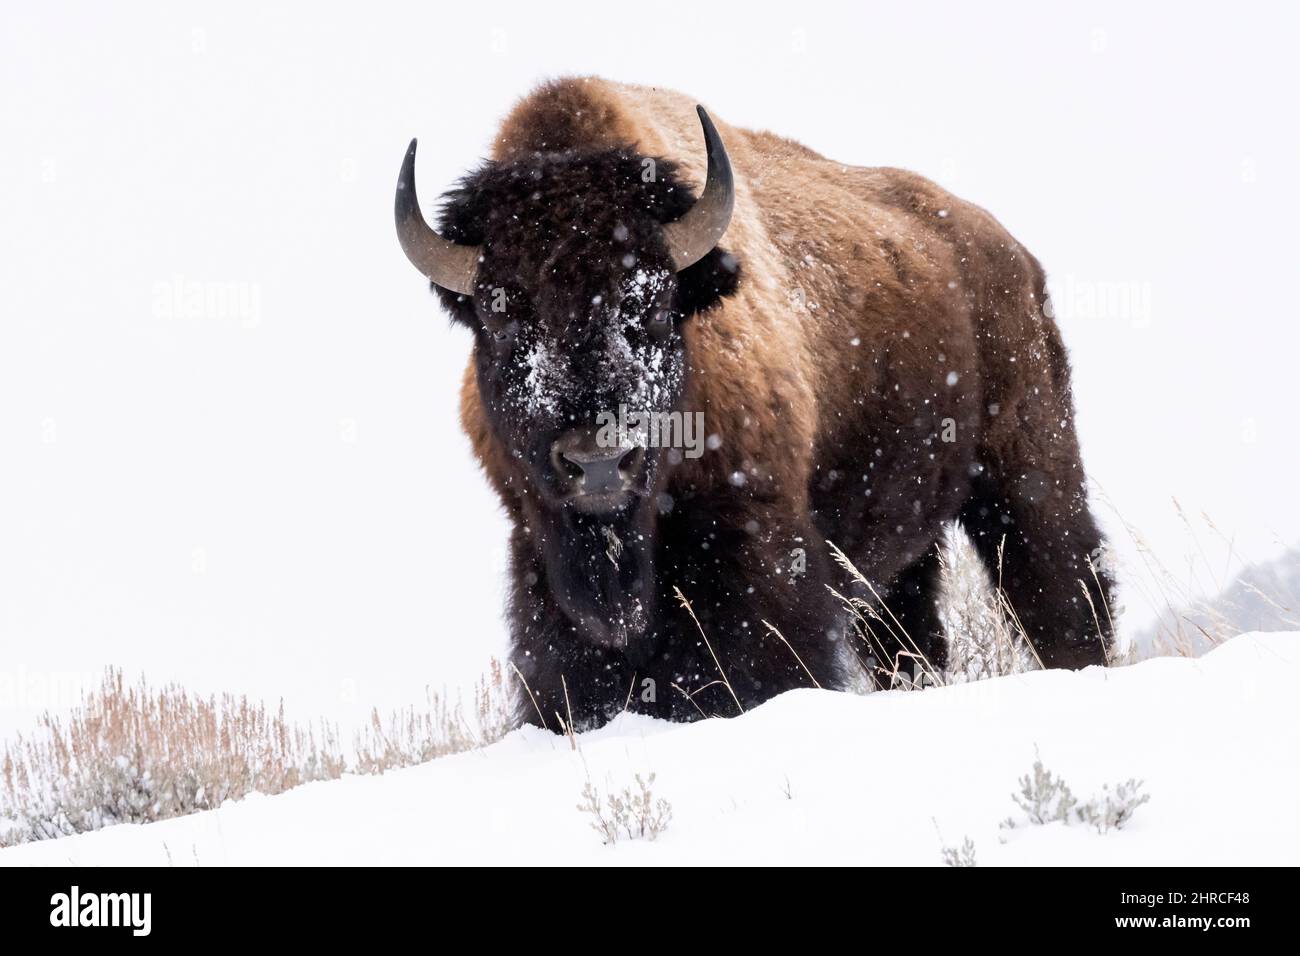 Bison, hiver, parc national de Yellowstone, Wyoming Banque D'Images